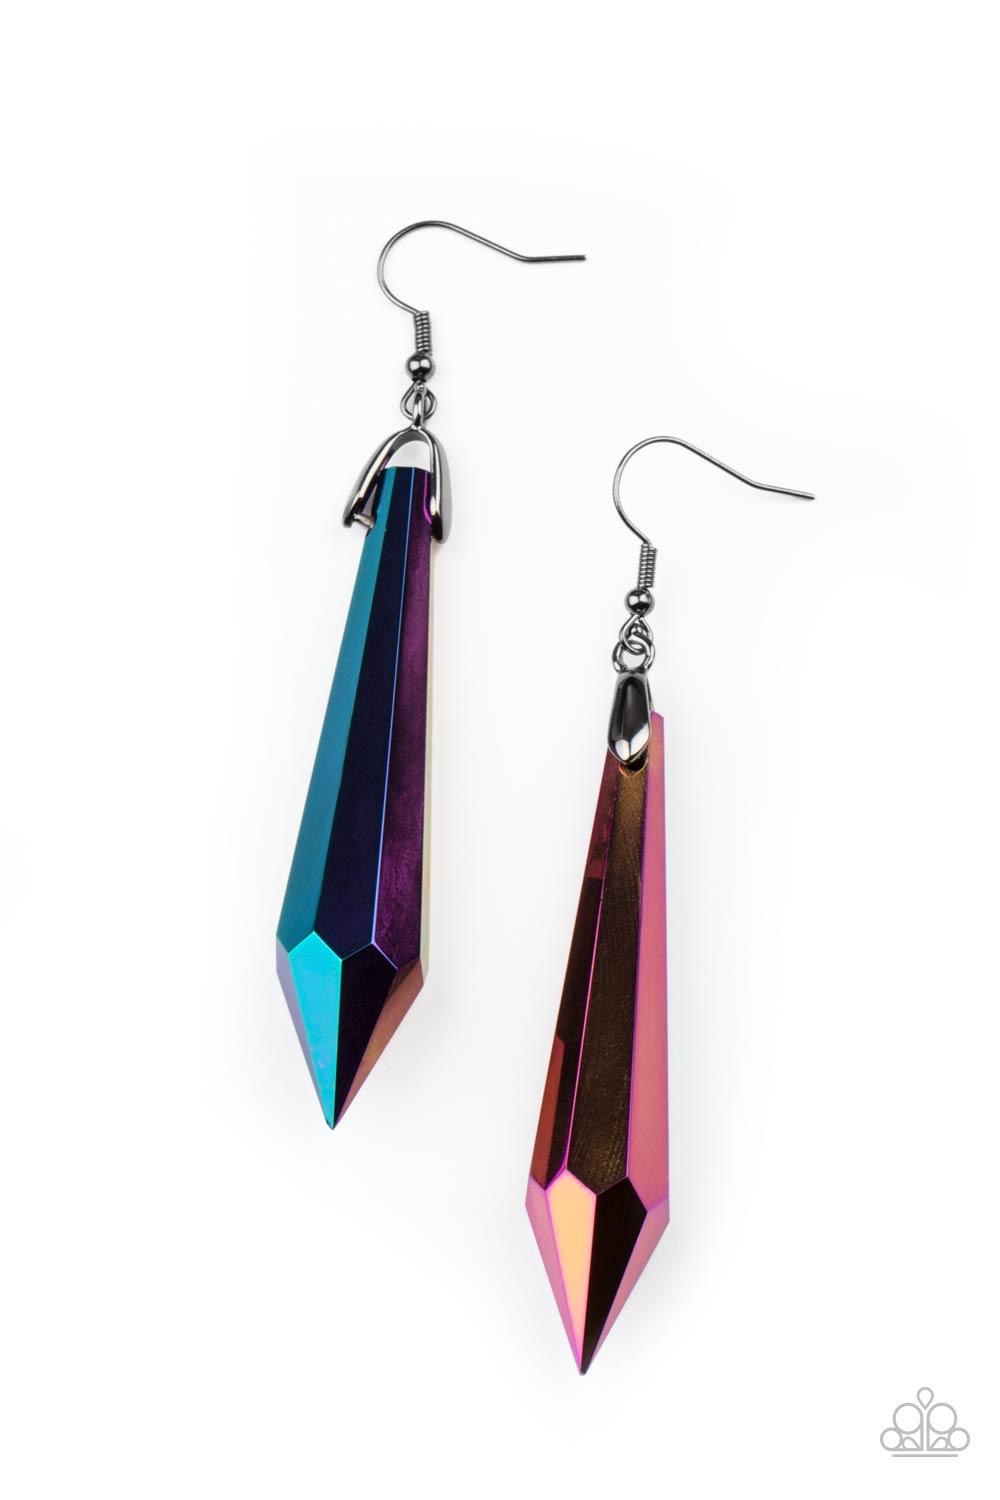 Paparazzi Accessories Sharp Dressed DIVA - Multi Featuring a stellar oil spill finish, a dramatically elongated gem attaches to a gunmetal fitting that swings from the ear for a hypnotizing fashion. Earring attaches to a standard fishhook fitting. Sold as